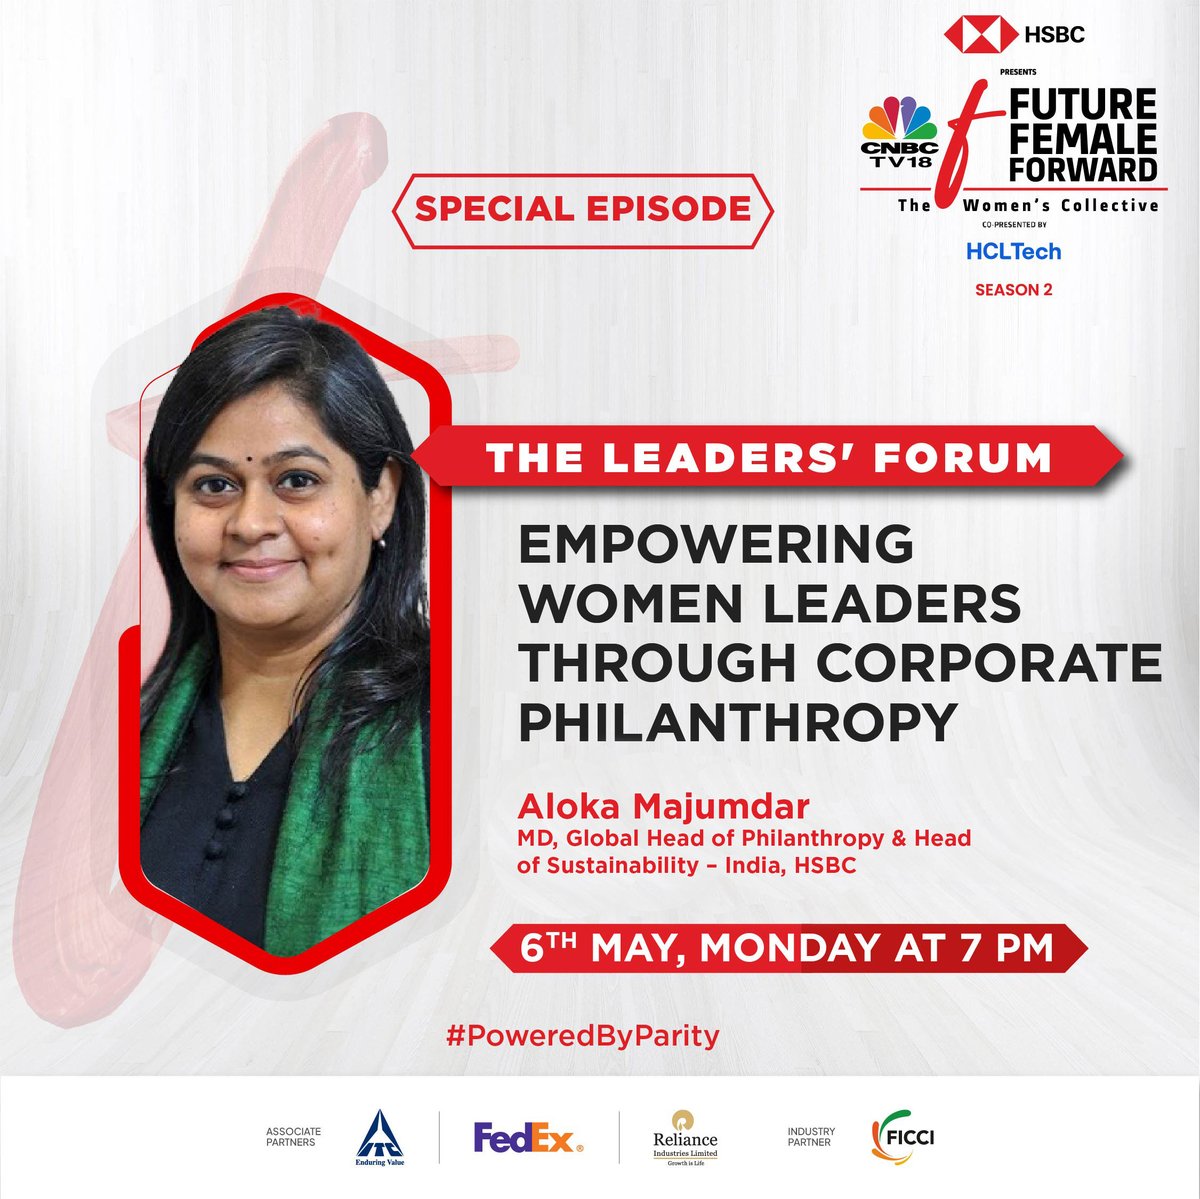 Join us on CNBC-TV18's Future. Female. Forward for an exclusive discussion with HSBC Trailblazers on gender parity & beyond. Save the date!  

06th May, Monday | 7 PM  

@HSBC_IN @hcltech @ITCCorpCom @FedExIndia @ficci_india
#FutureFemaleForward #Season2 #FutureisHERs